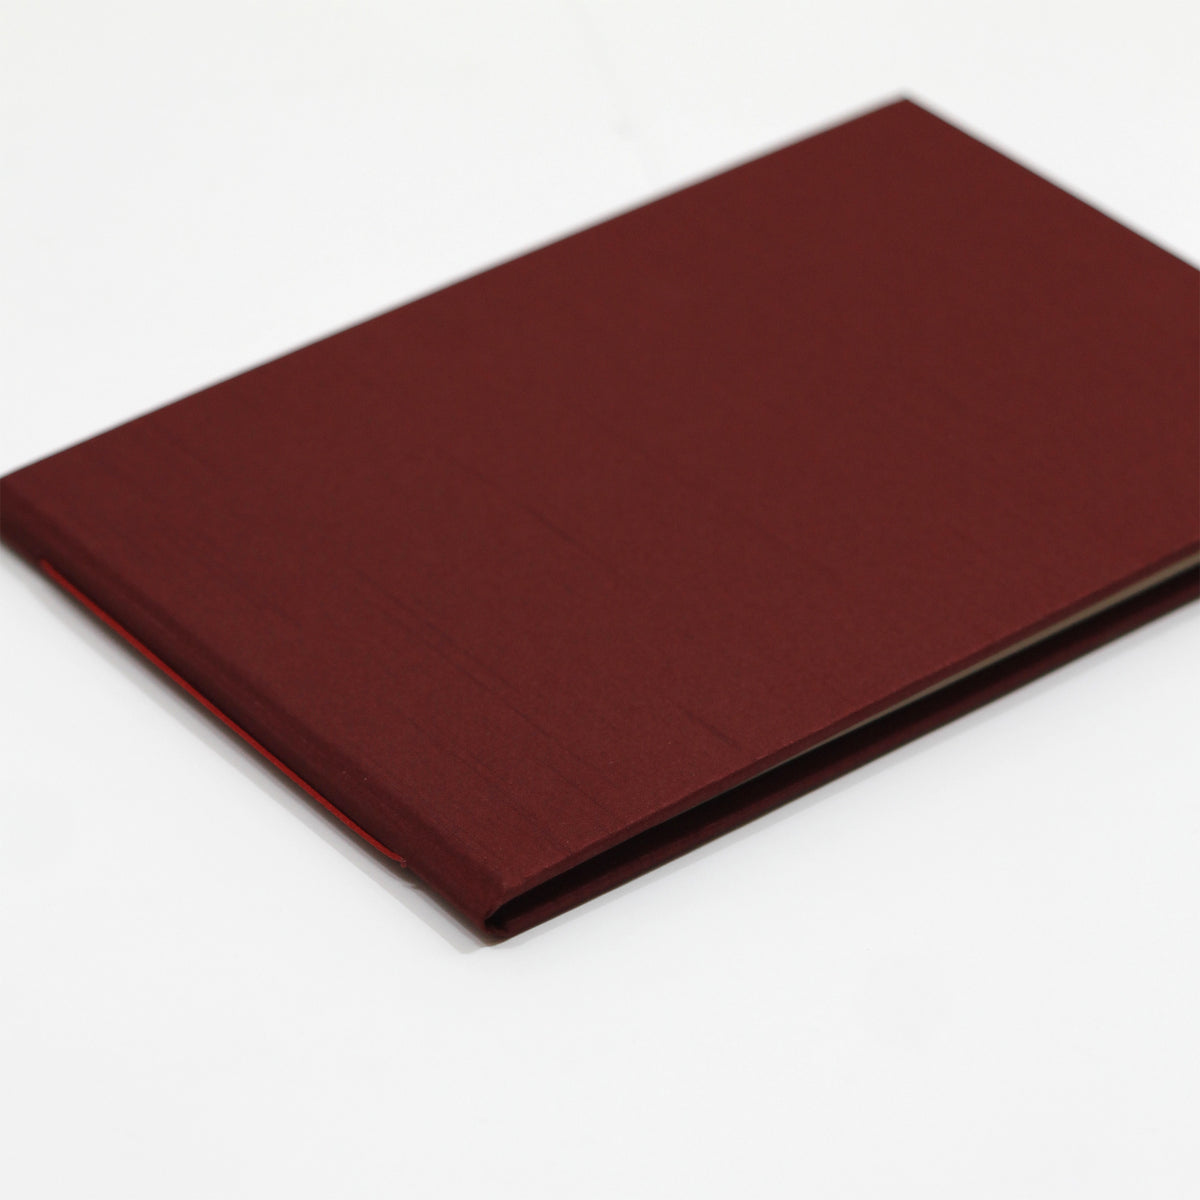 Guestbook | Cover: Garnet Silk | Available Personalized